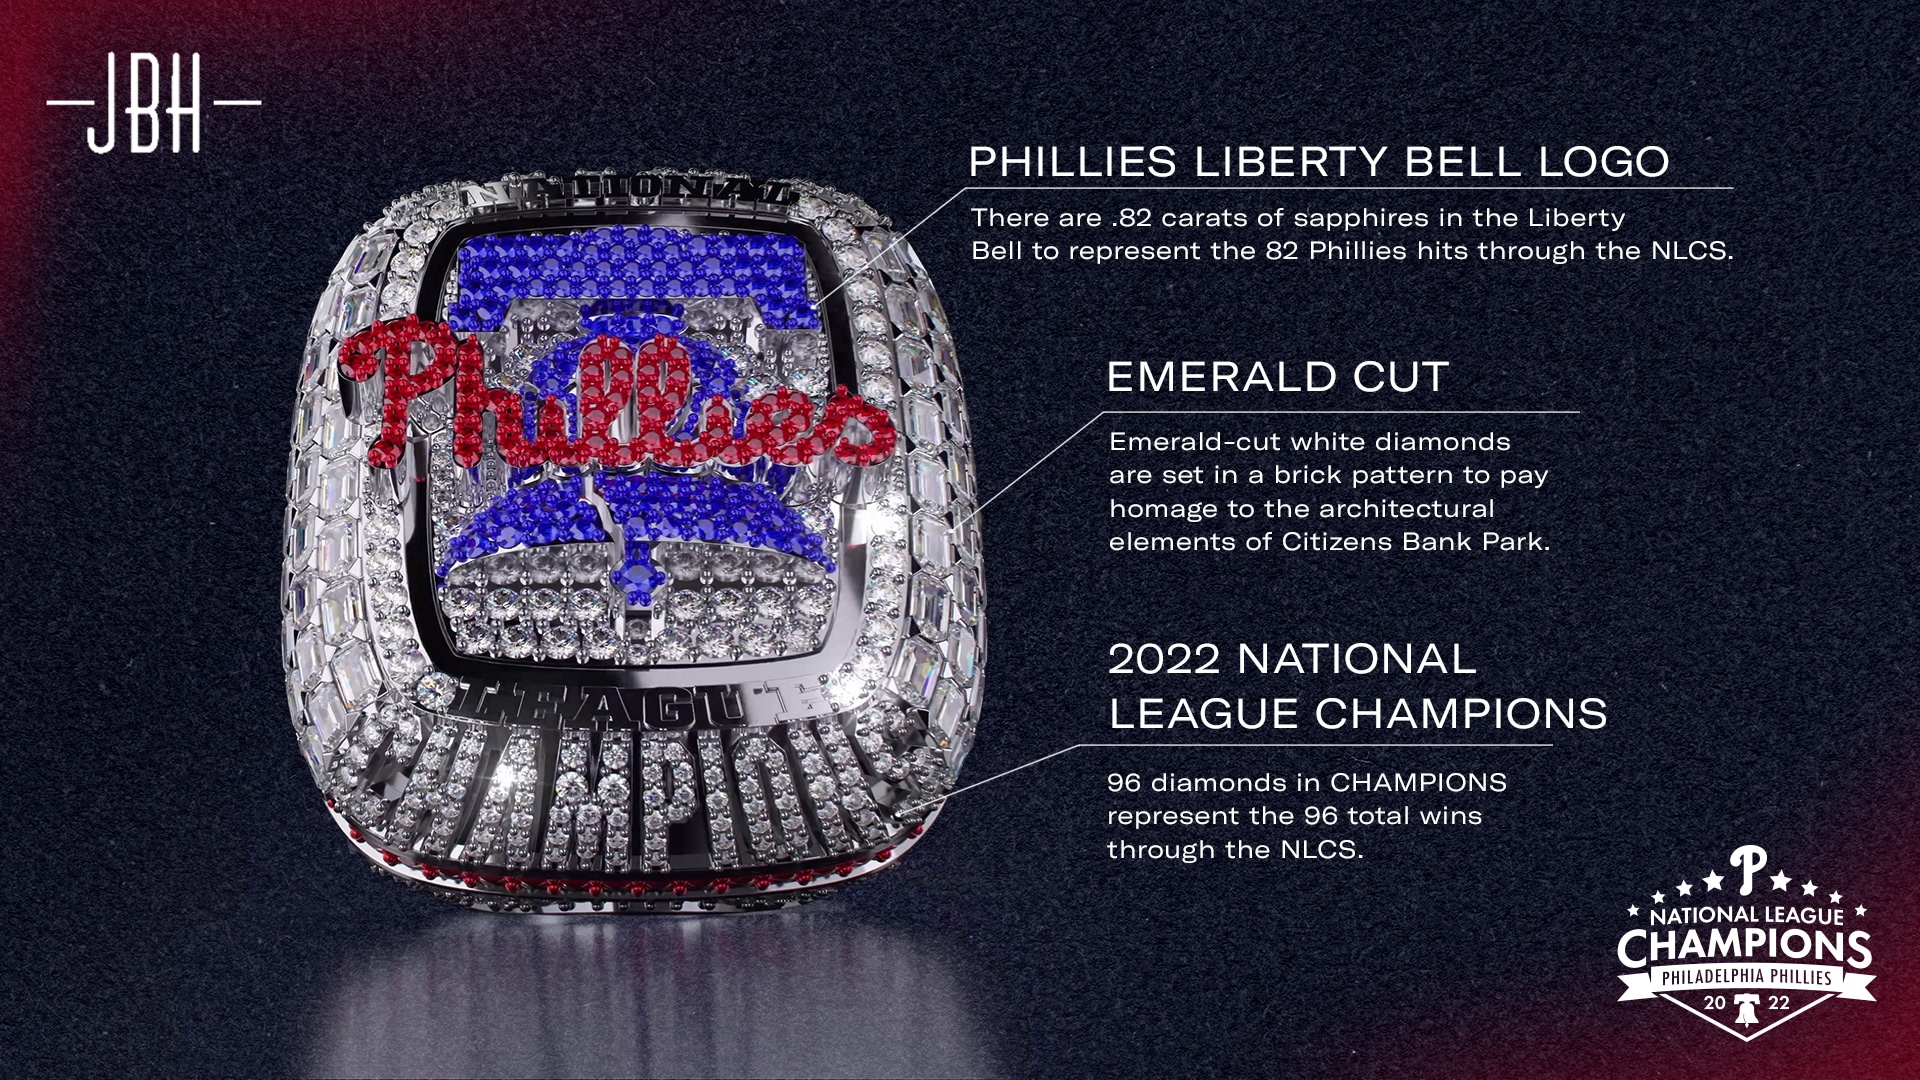 The Phillies Ring Ceremony Discussion Should Focus on the Lost Distinction of the Pennant